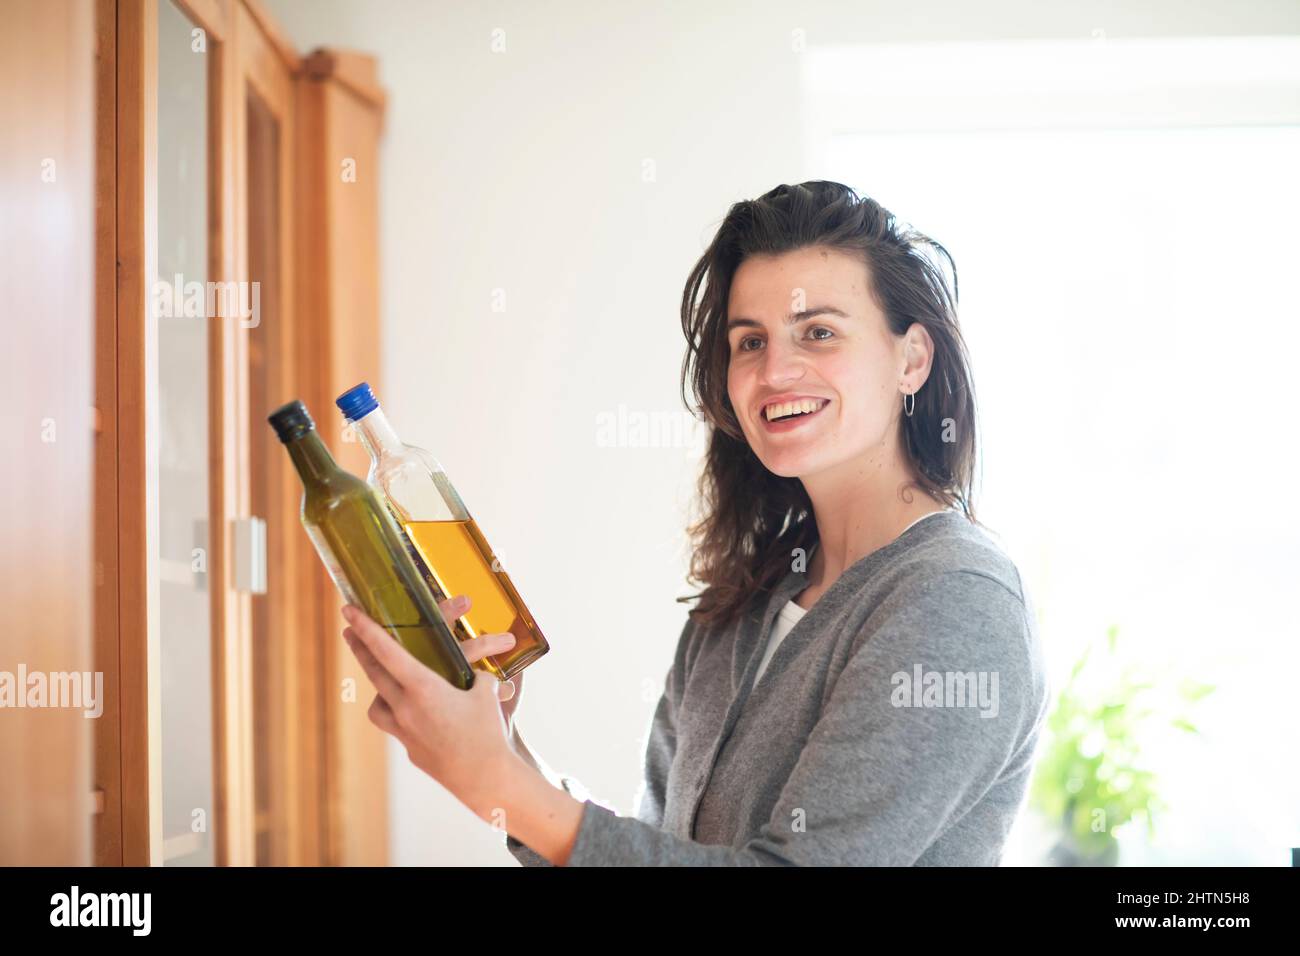 Smiling woman holding two bottles of live oil at home Stock Photo